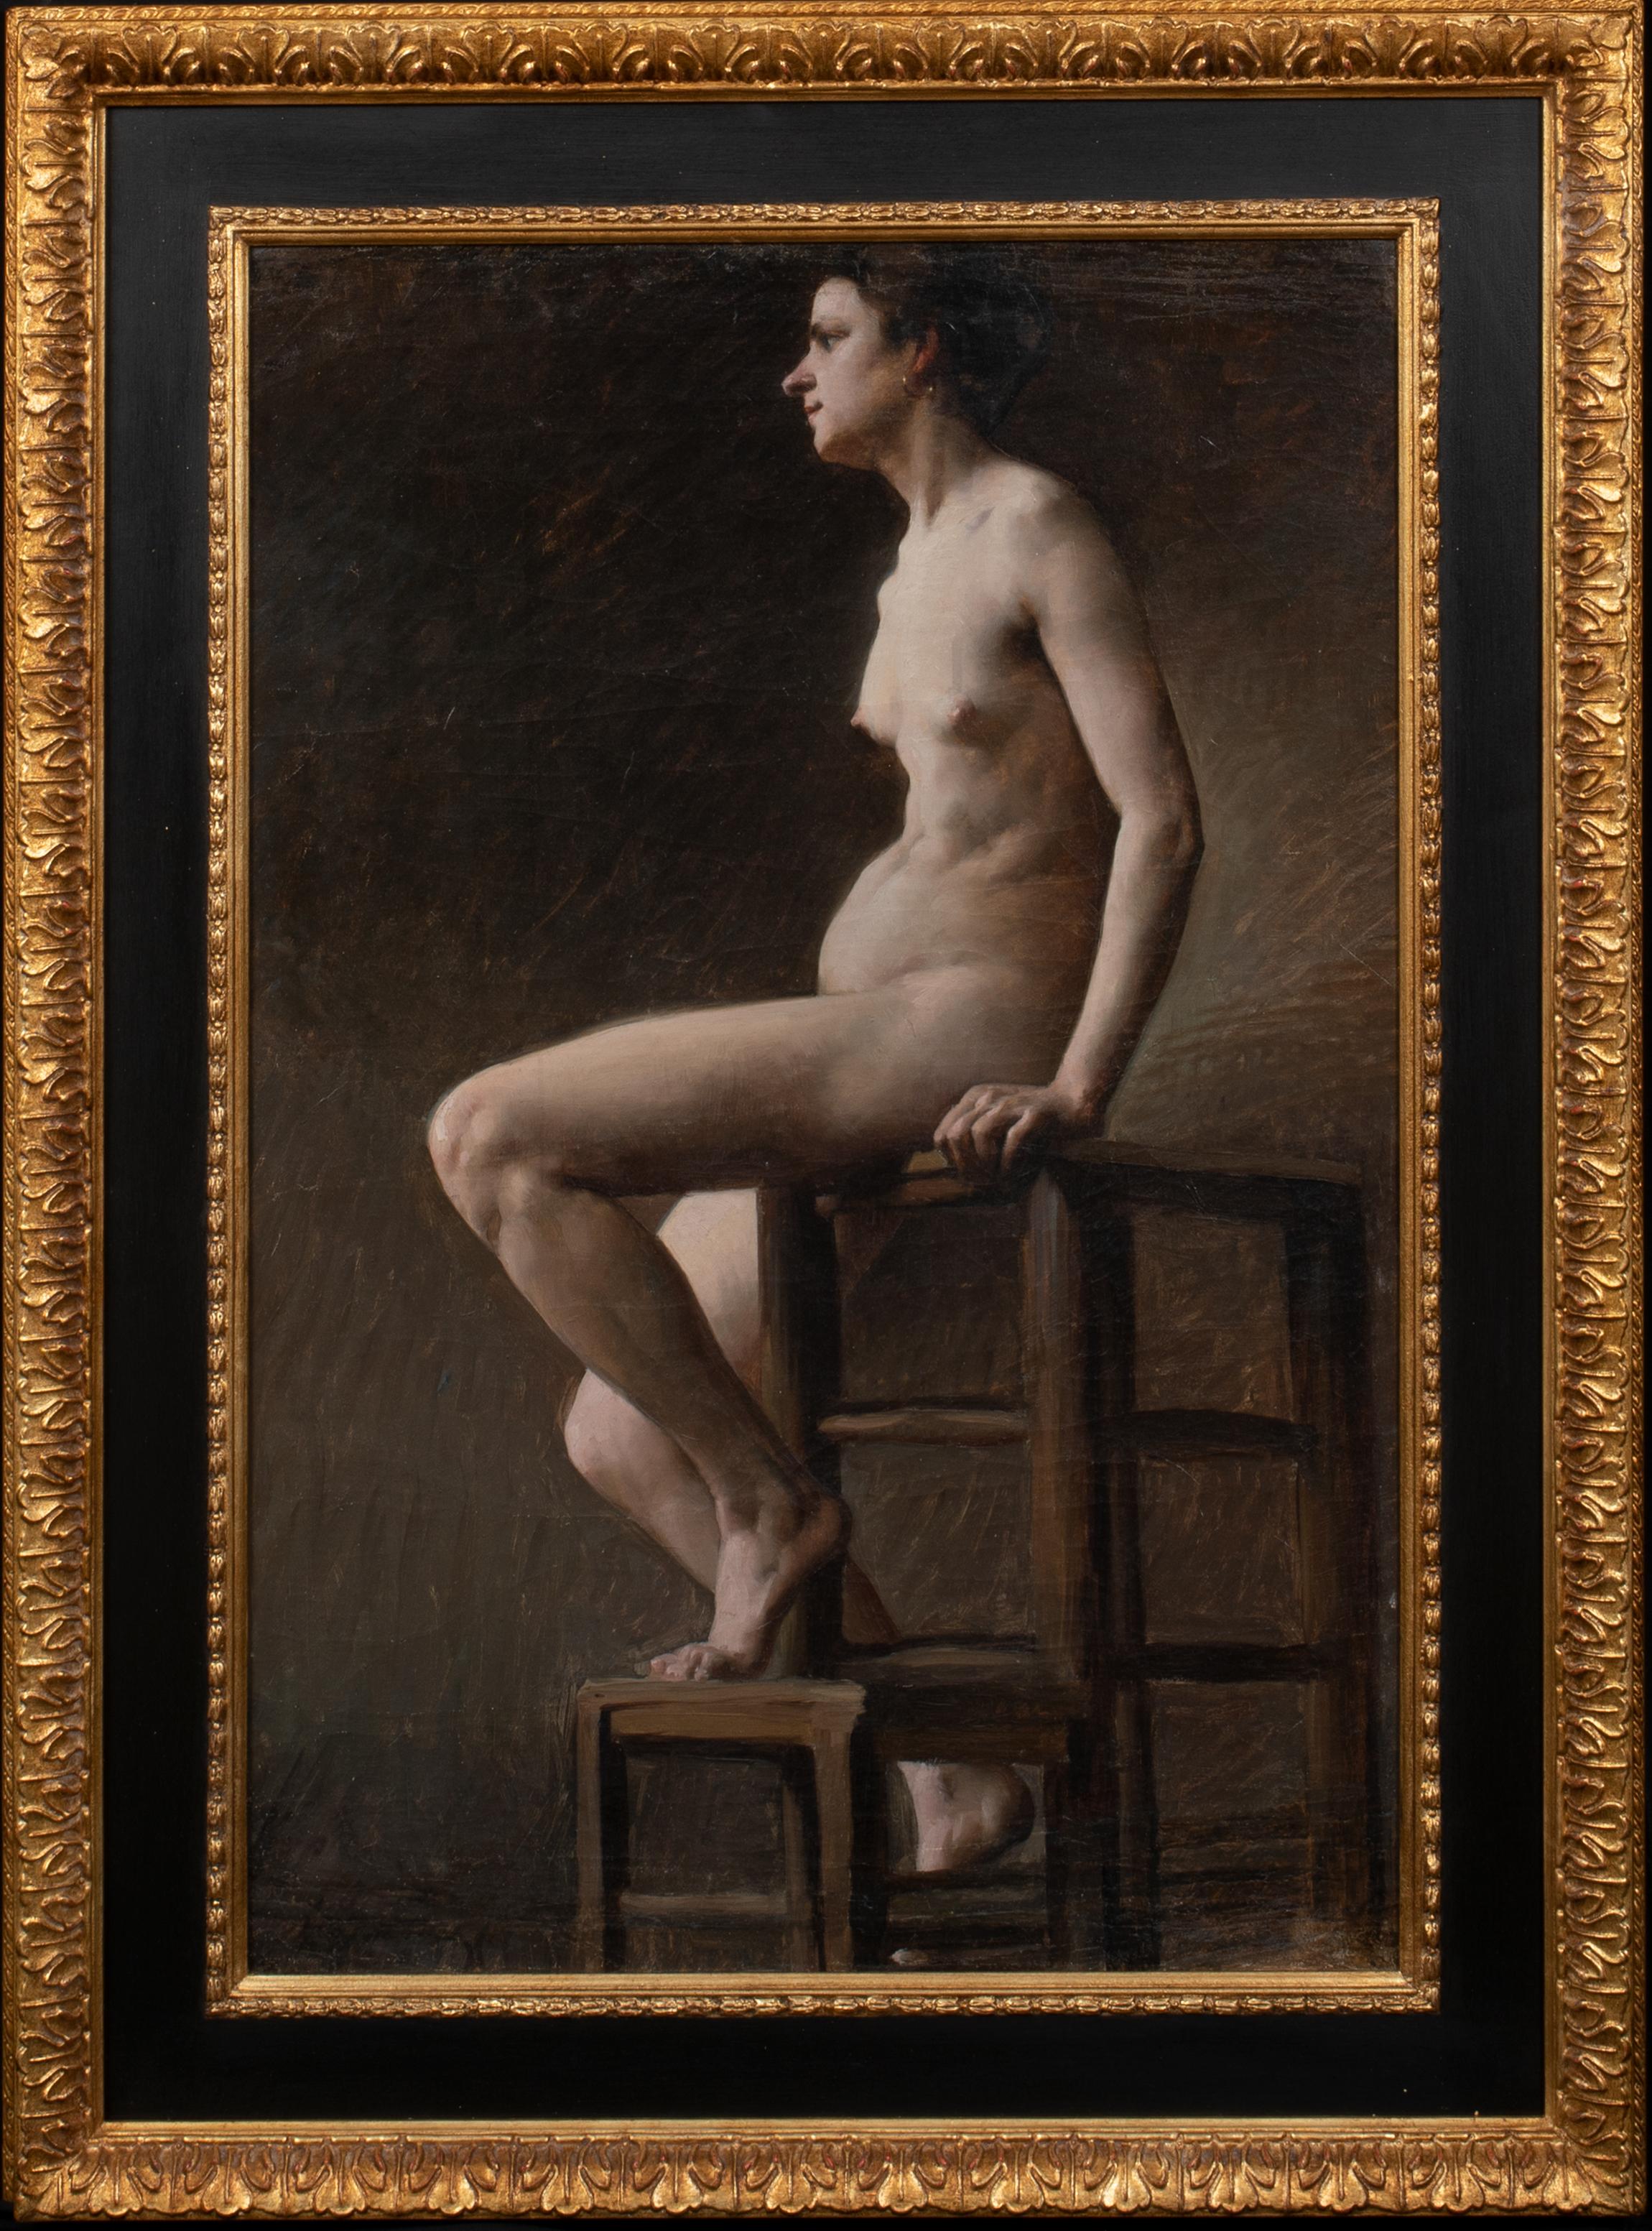 Unknown Portrait Painting - Study Of A Nude Woman Seated, 19th century